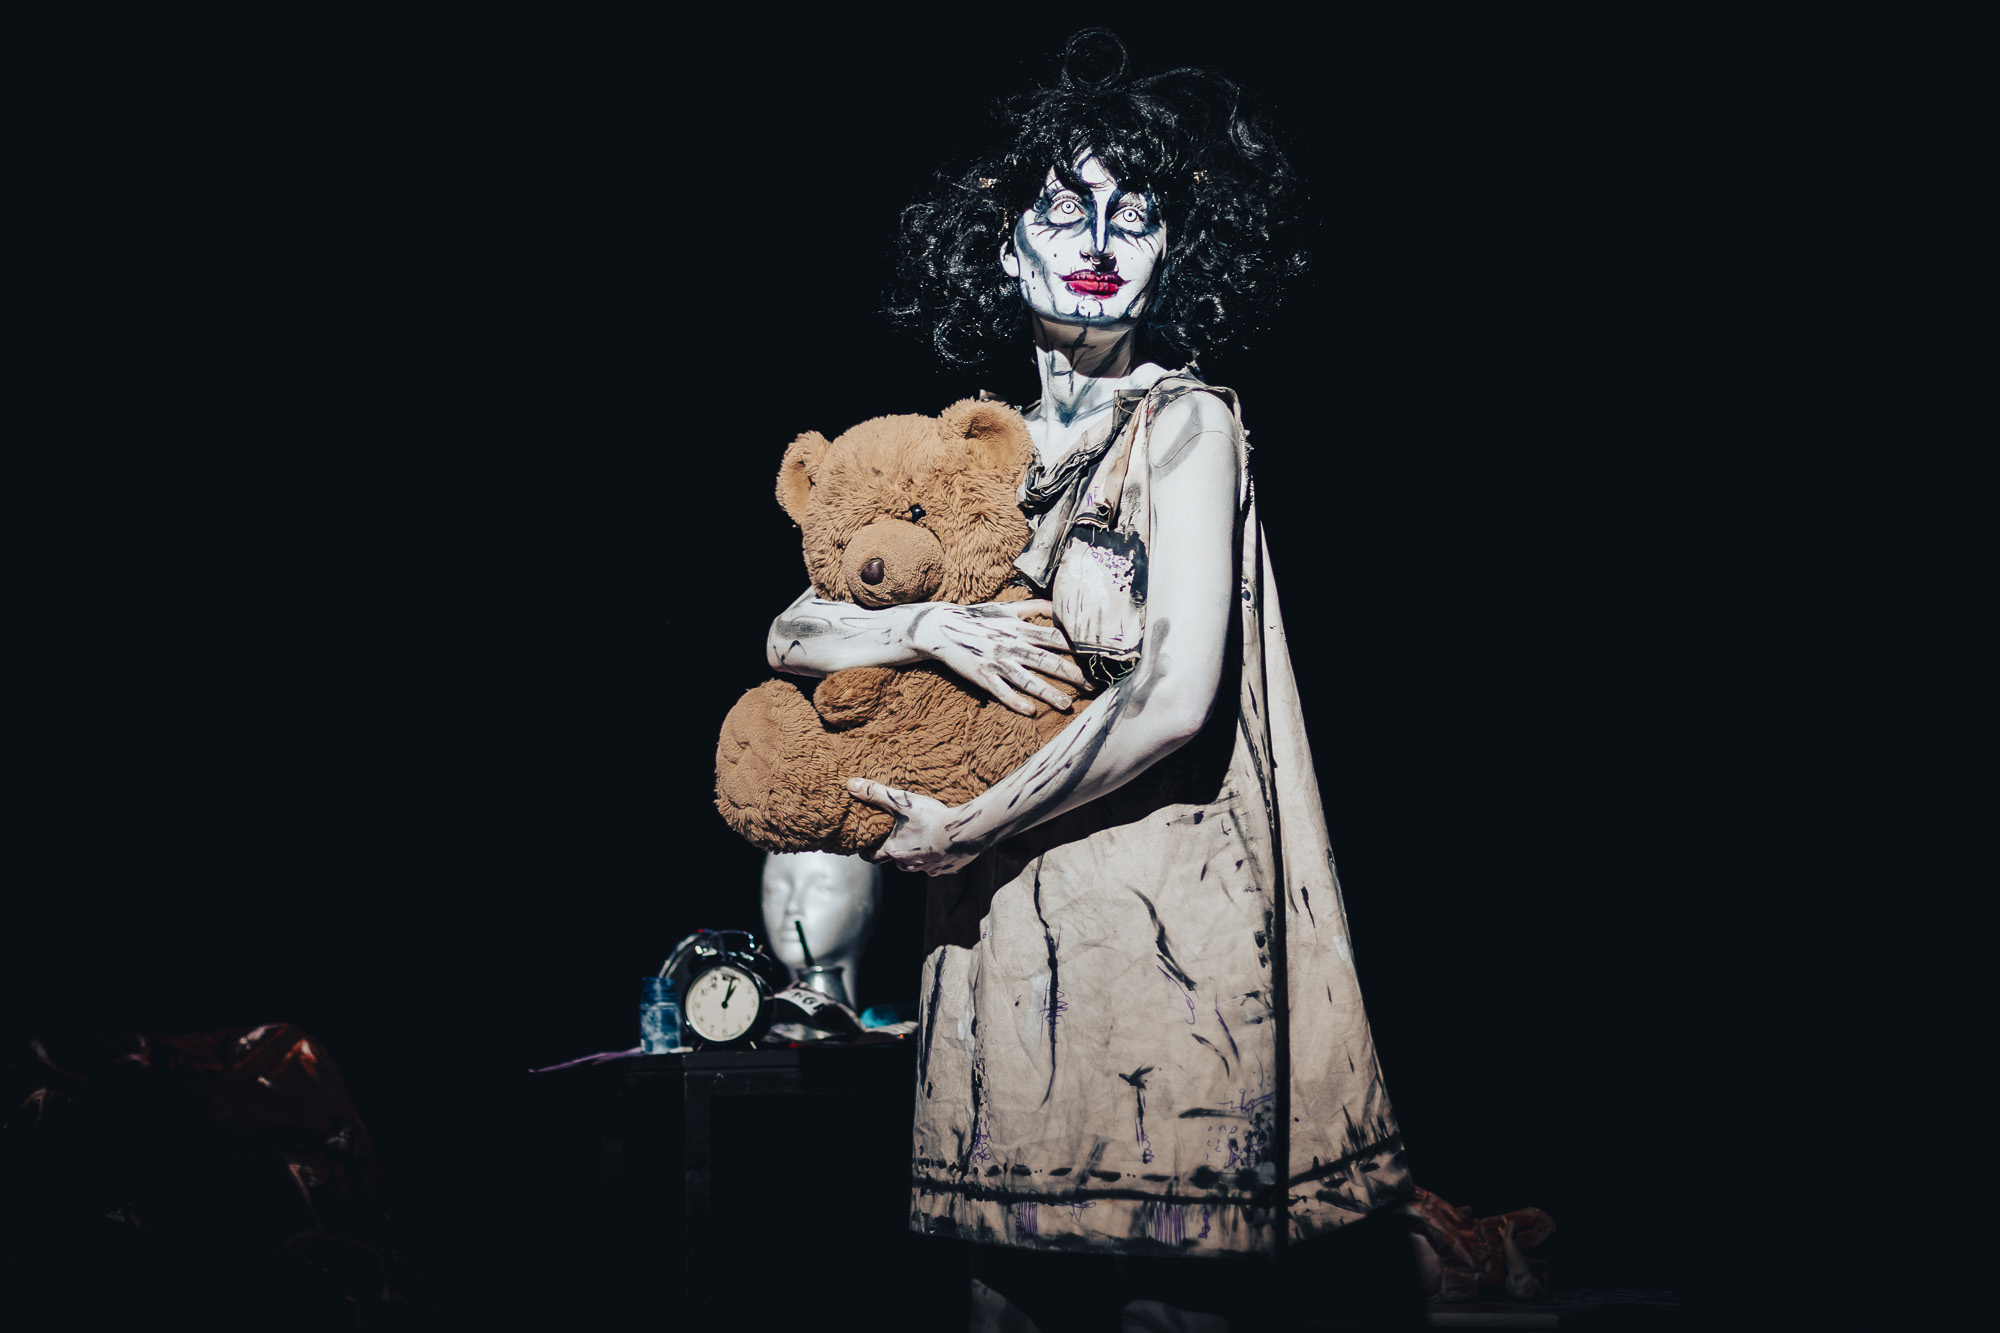 A person with comic-like make-up is holding a teddy bear.